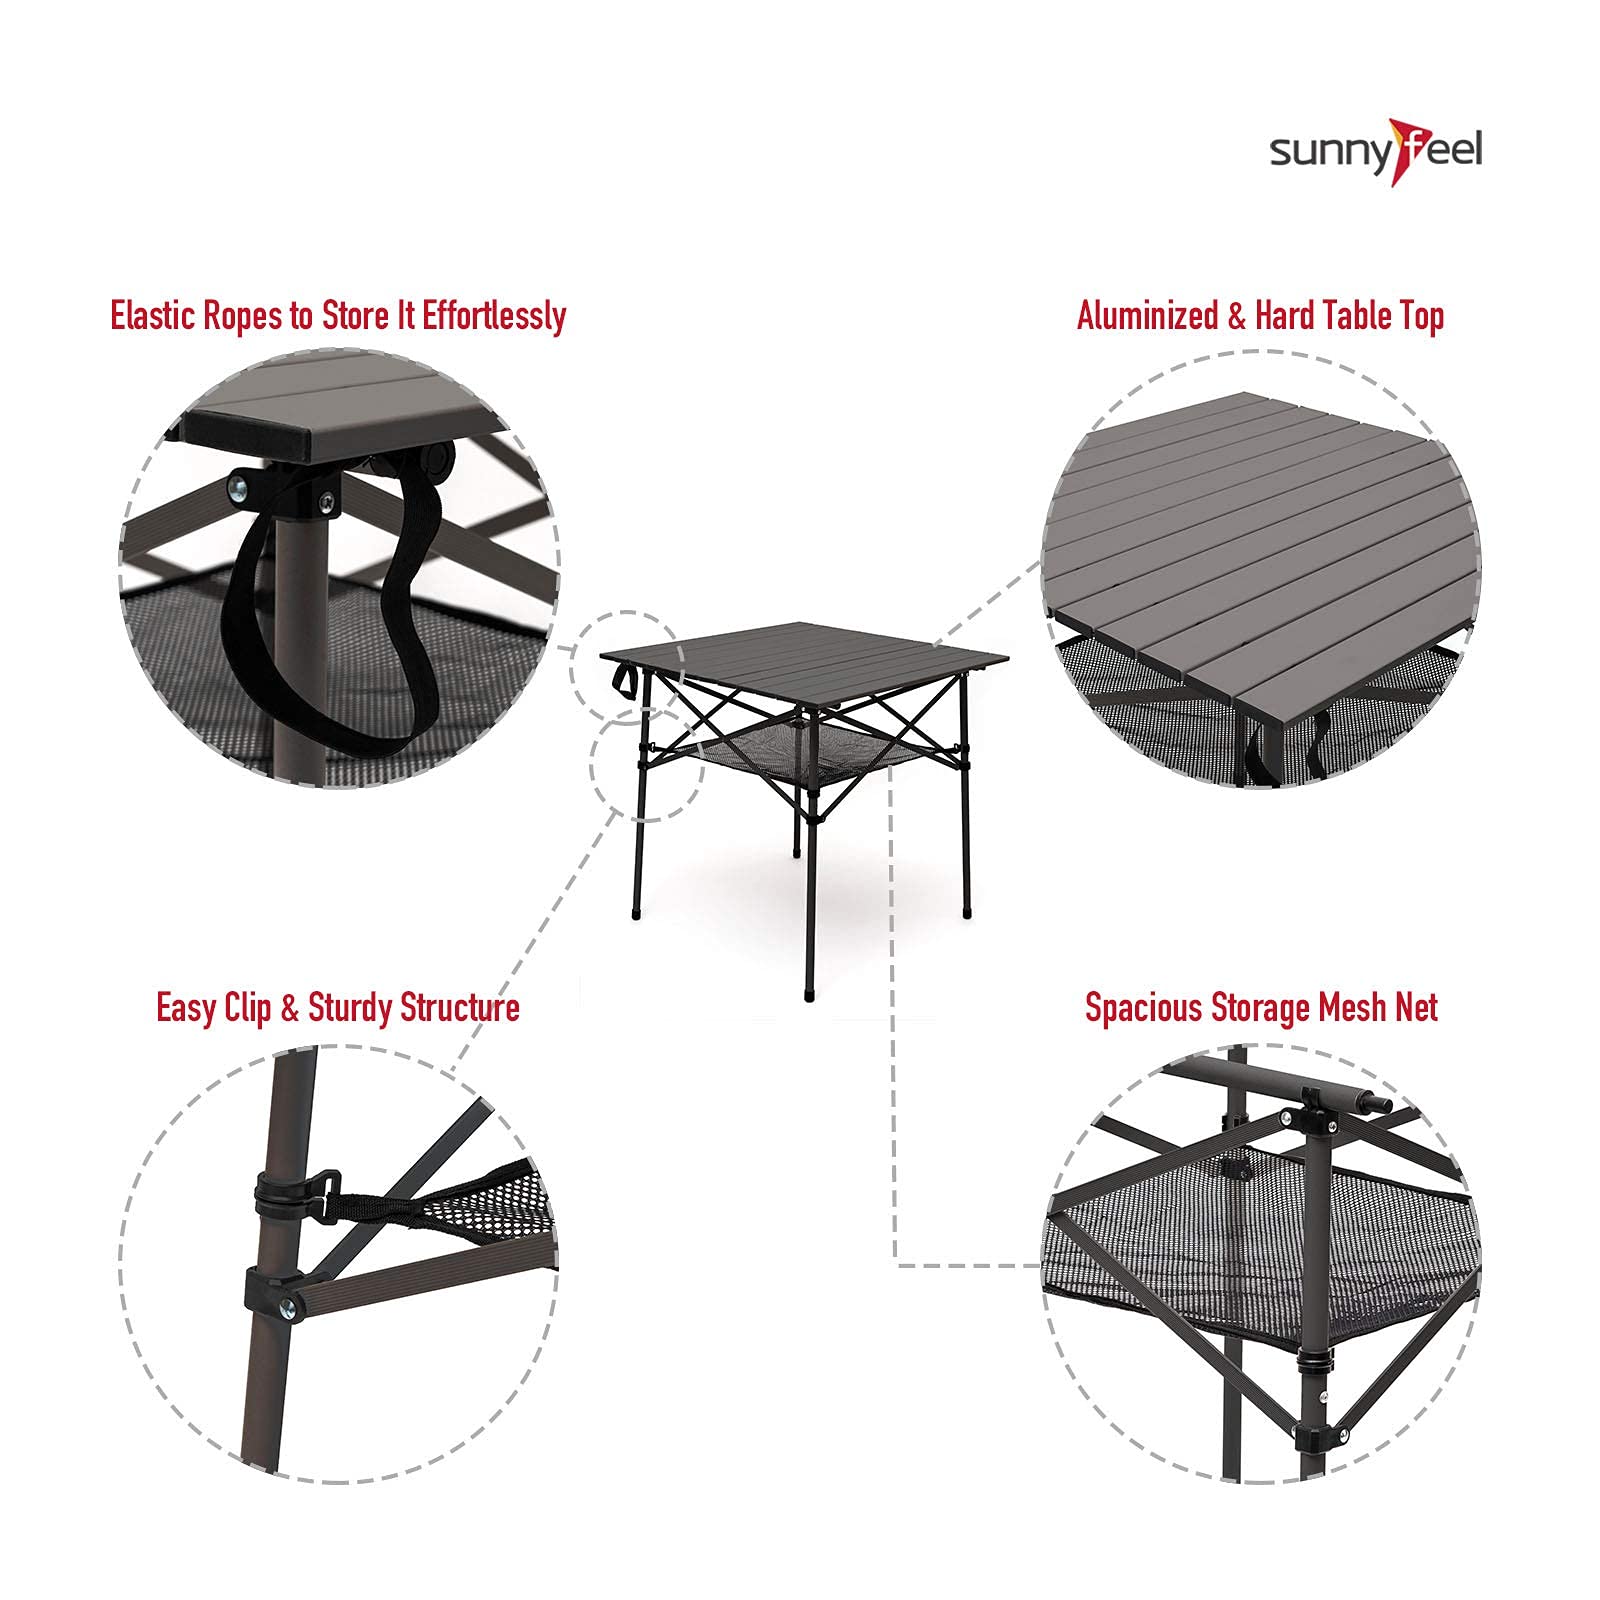 SUNNYFEEL Outdoor Folding Table | Lightweight Compact Aluminum Camping Table, Roll Up Top 4 People Portable Camp Square Tables with Carry Bag for Picnic/Cooking/Beach/Travel/BBQ